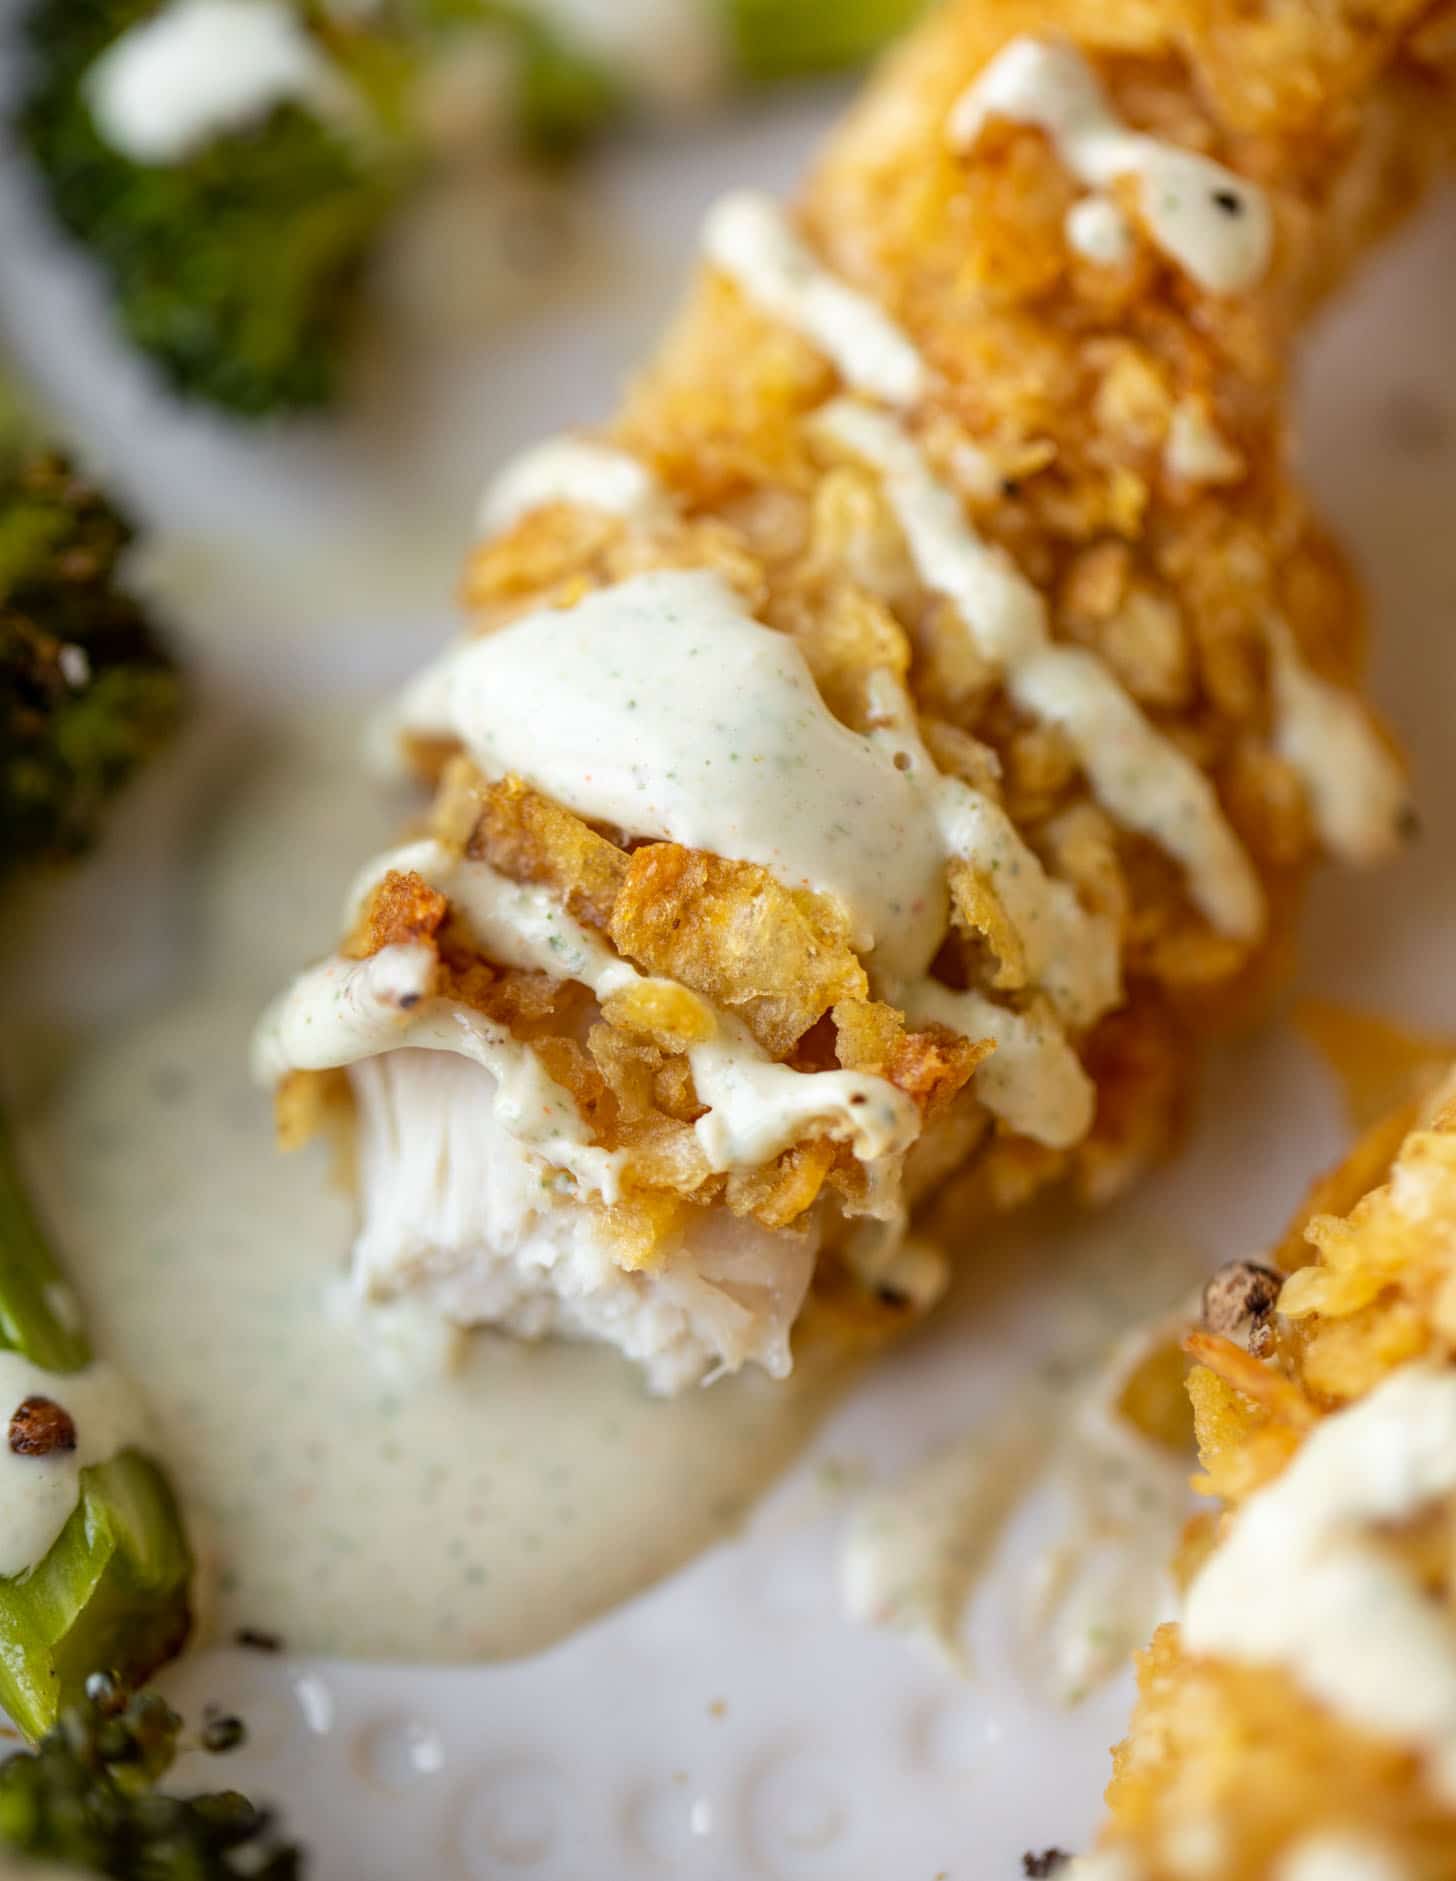 potato chip crusted chicken fingers with ranch and roasted broccoli